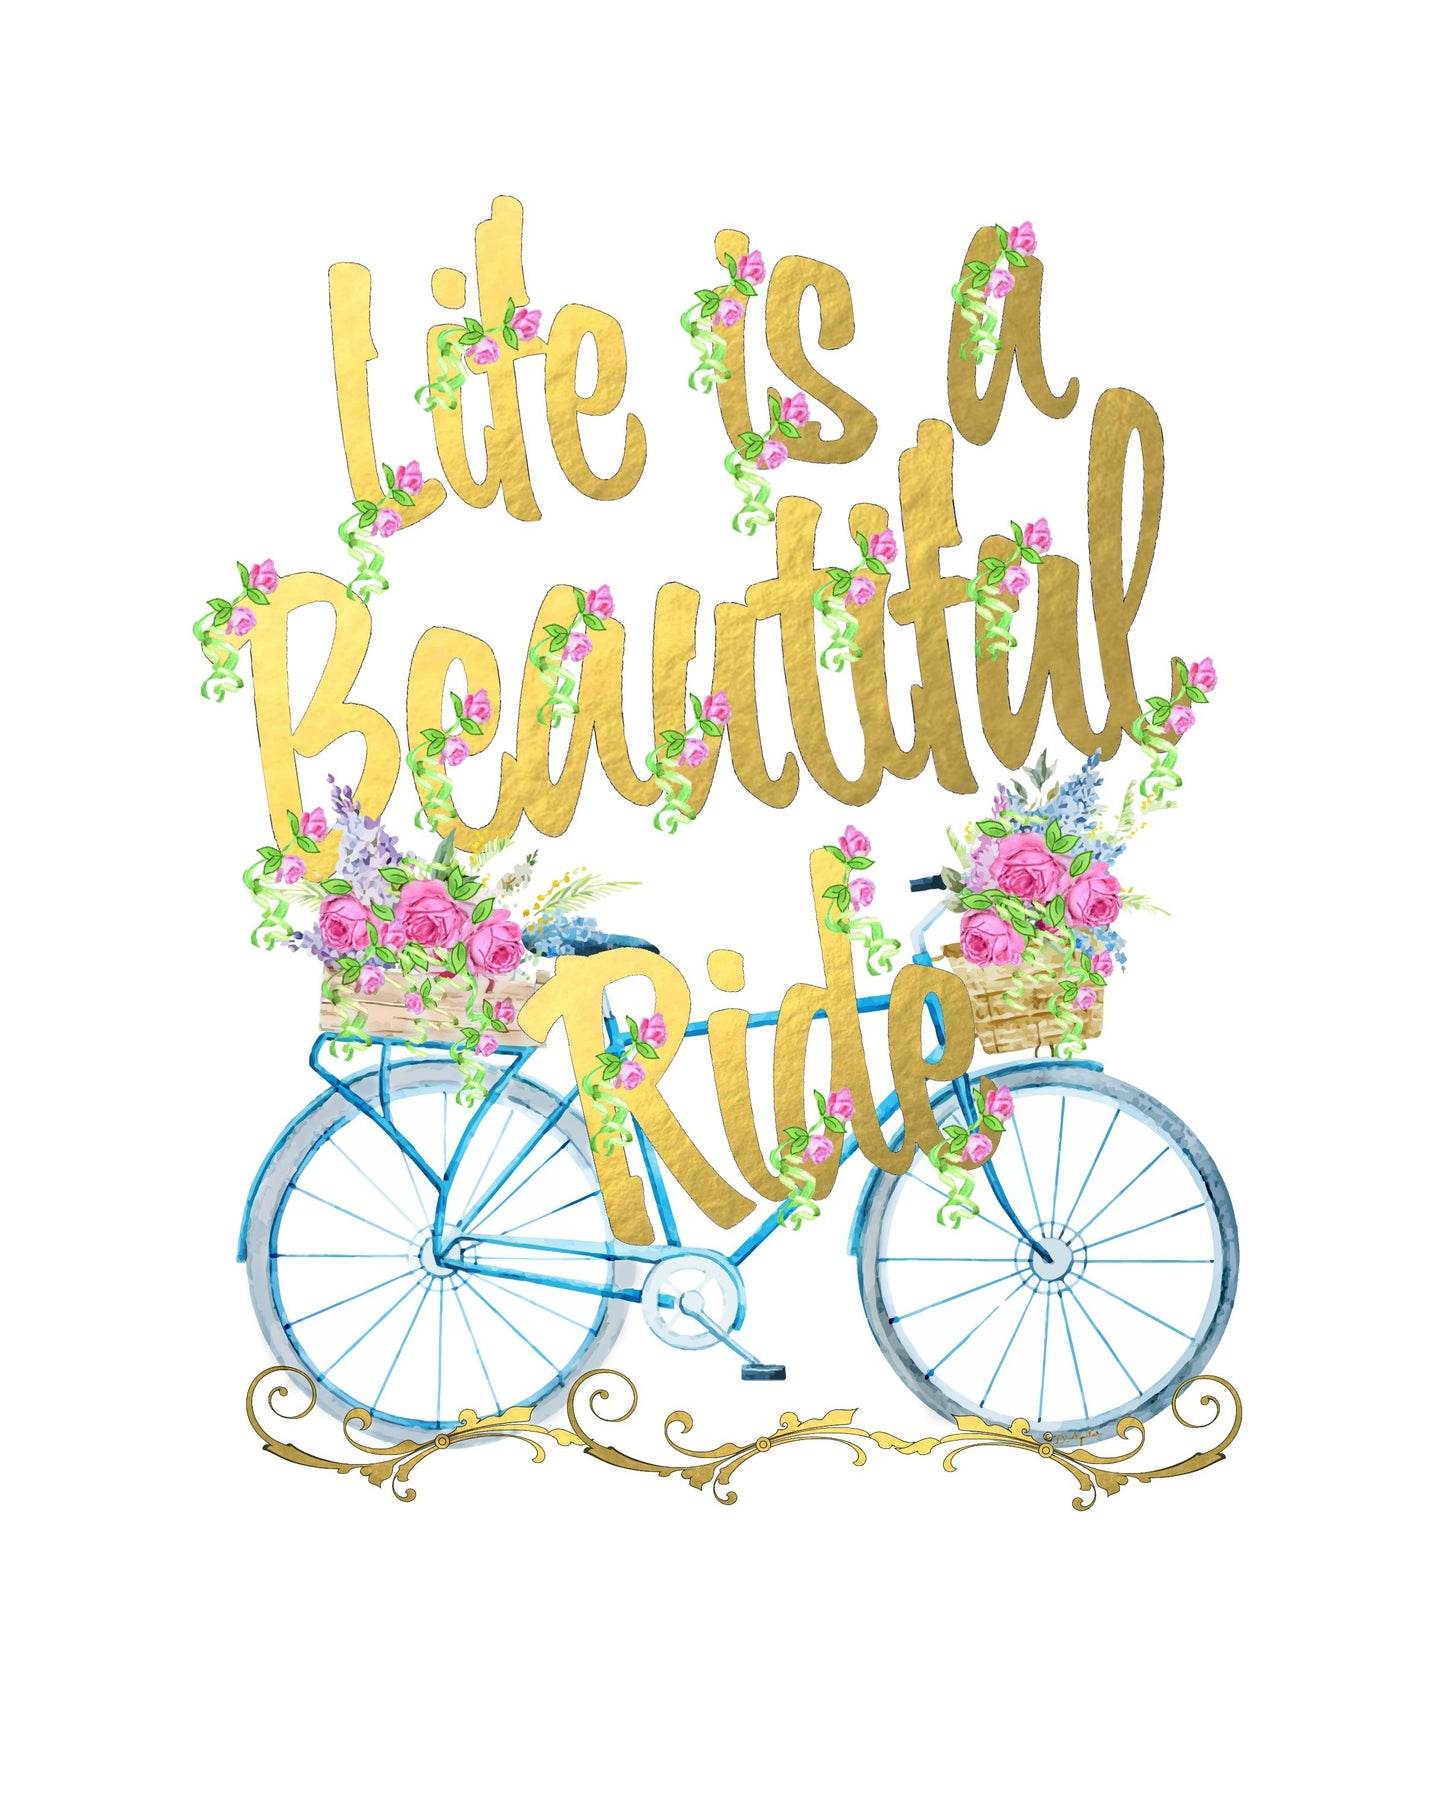 Bicycle Print Set Ready To Frame "Life is a Beautiful Ride" & "Take Time To Smell The Flowers"